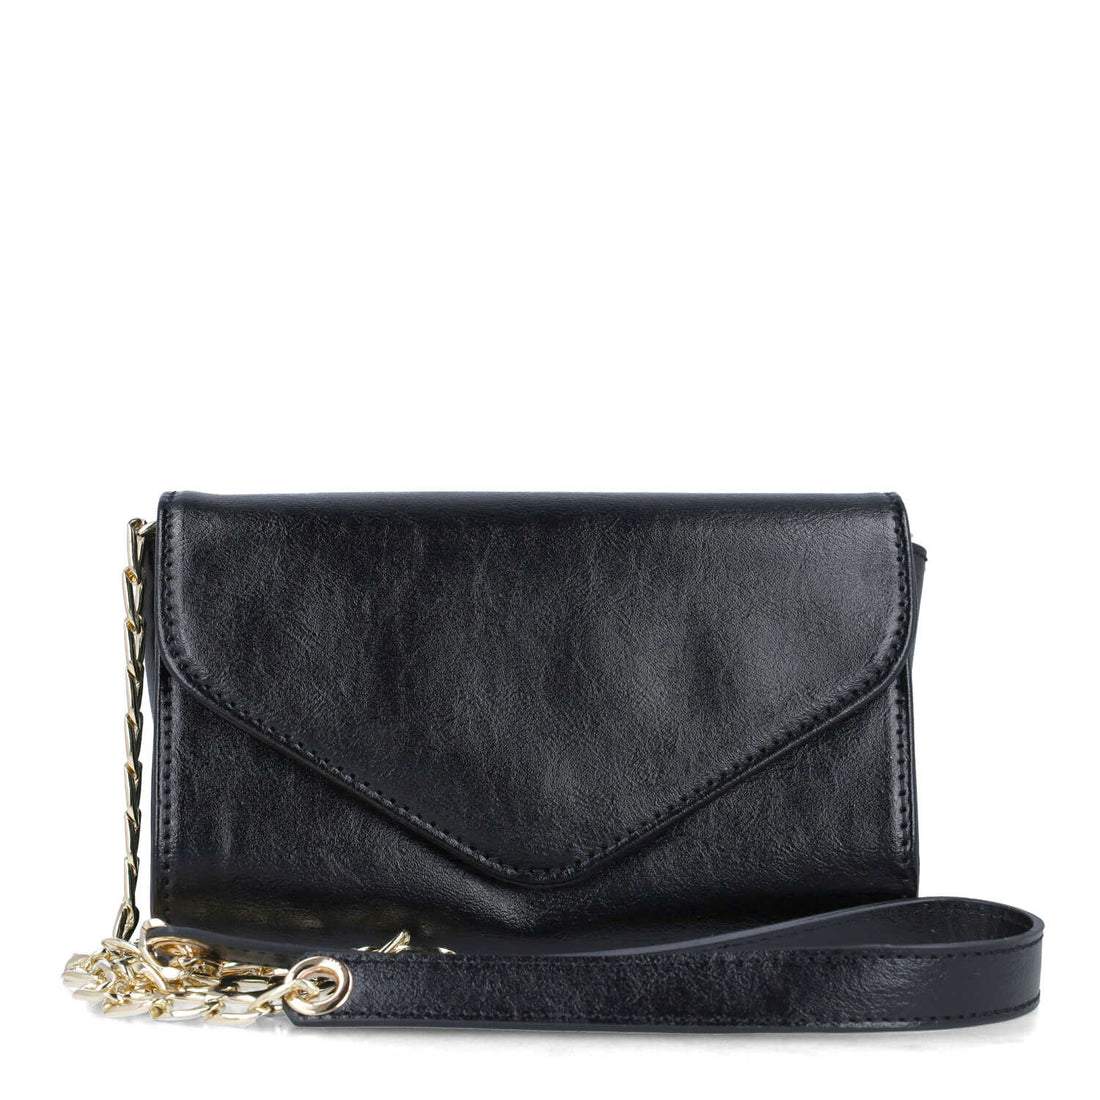 Black Leather With Gold Chain Crossbody Bag